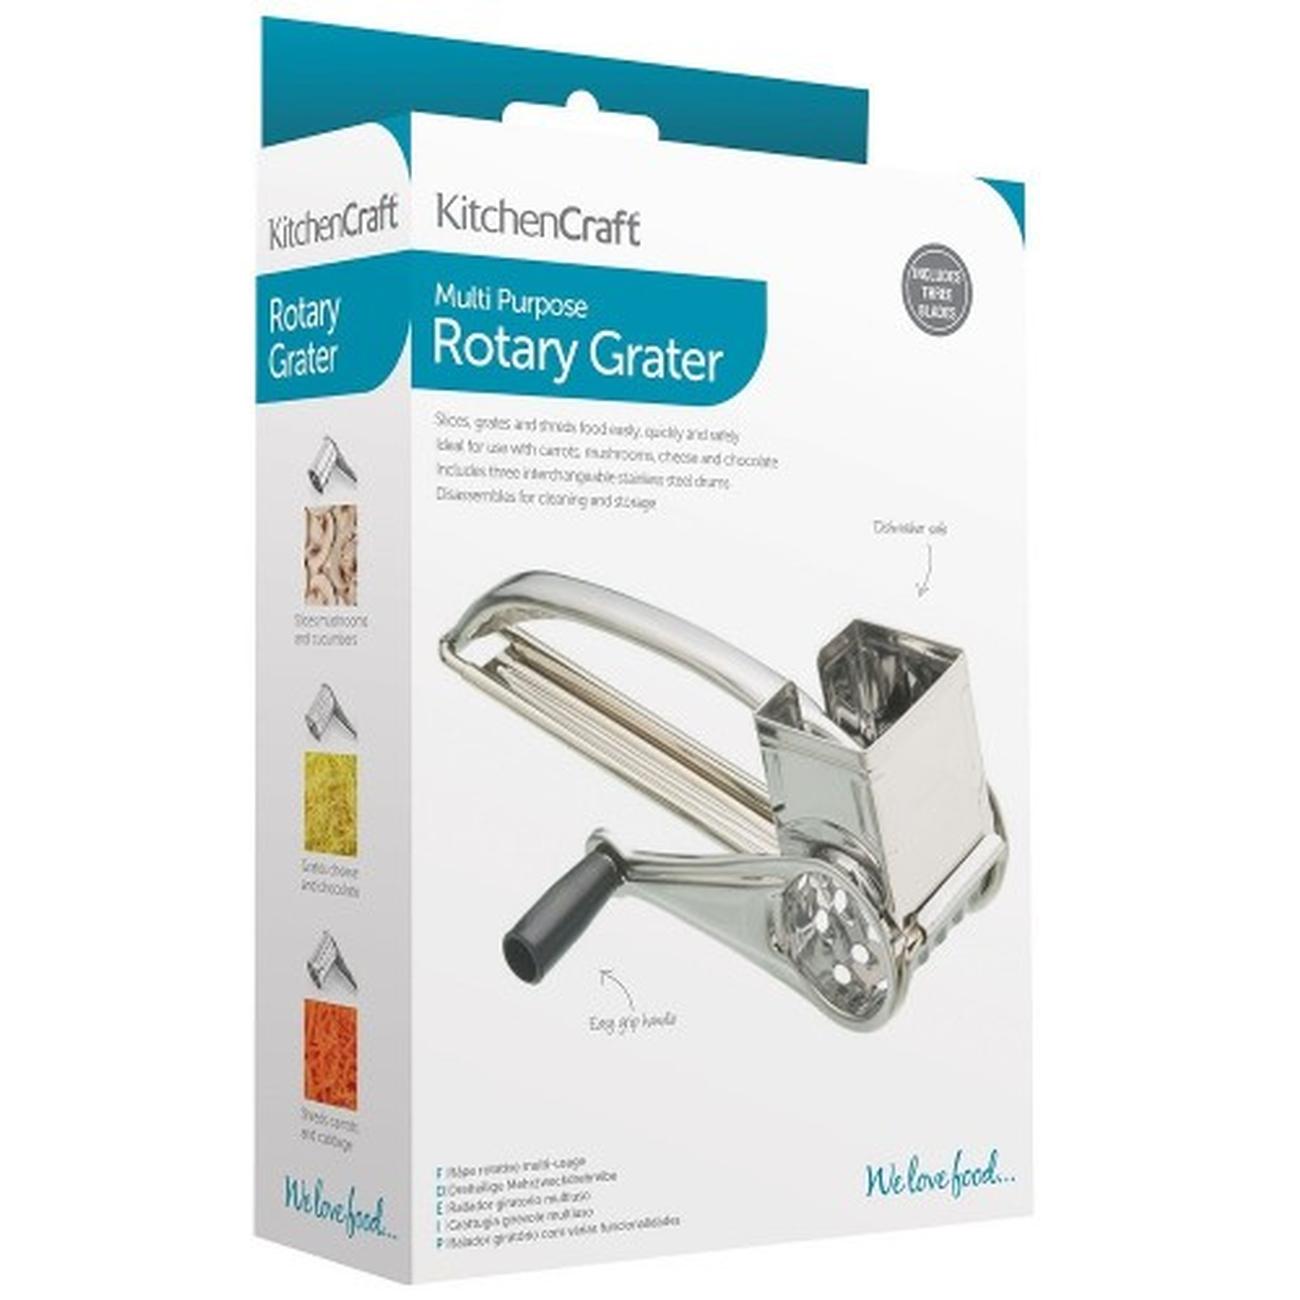 https://www.thekitchenwhisk.ie/contentfiles/productImages/Large/KitchenCraft-Stainless-Steel-Rotary-Cheese-Grater-3-Blades-2.jpg